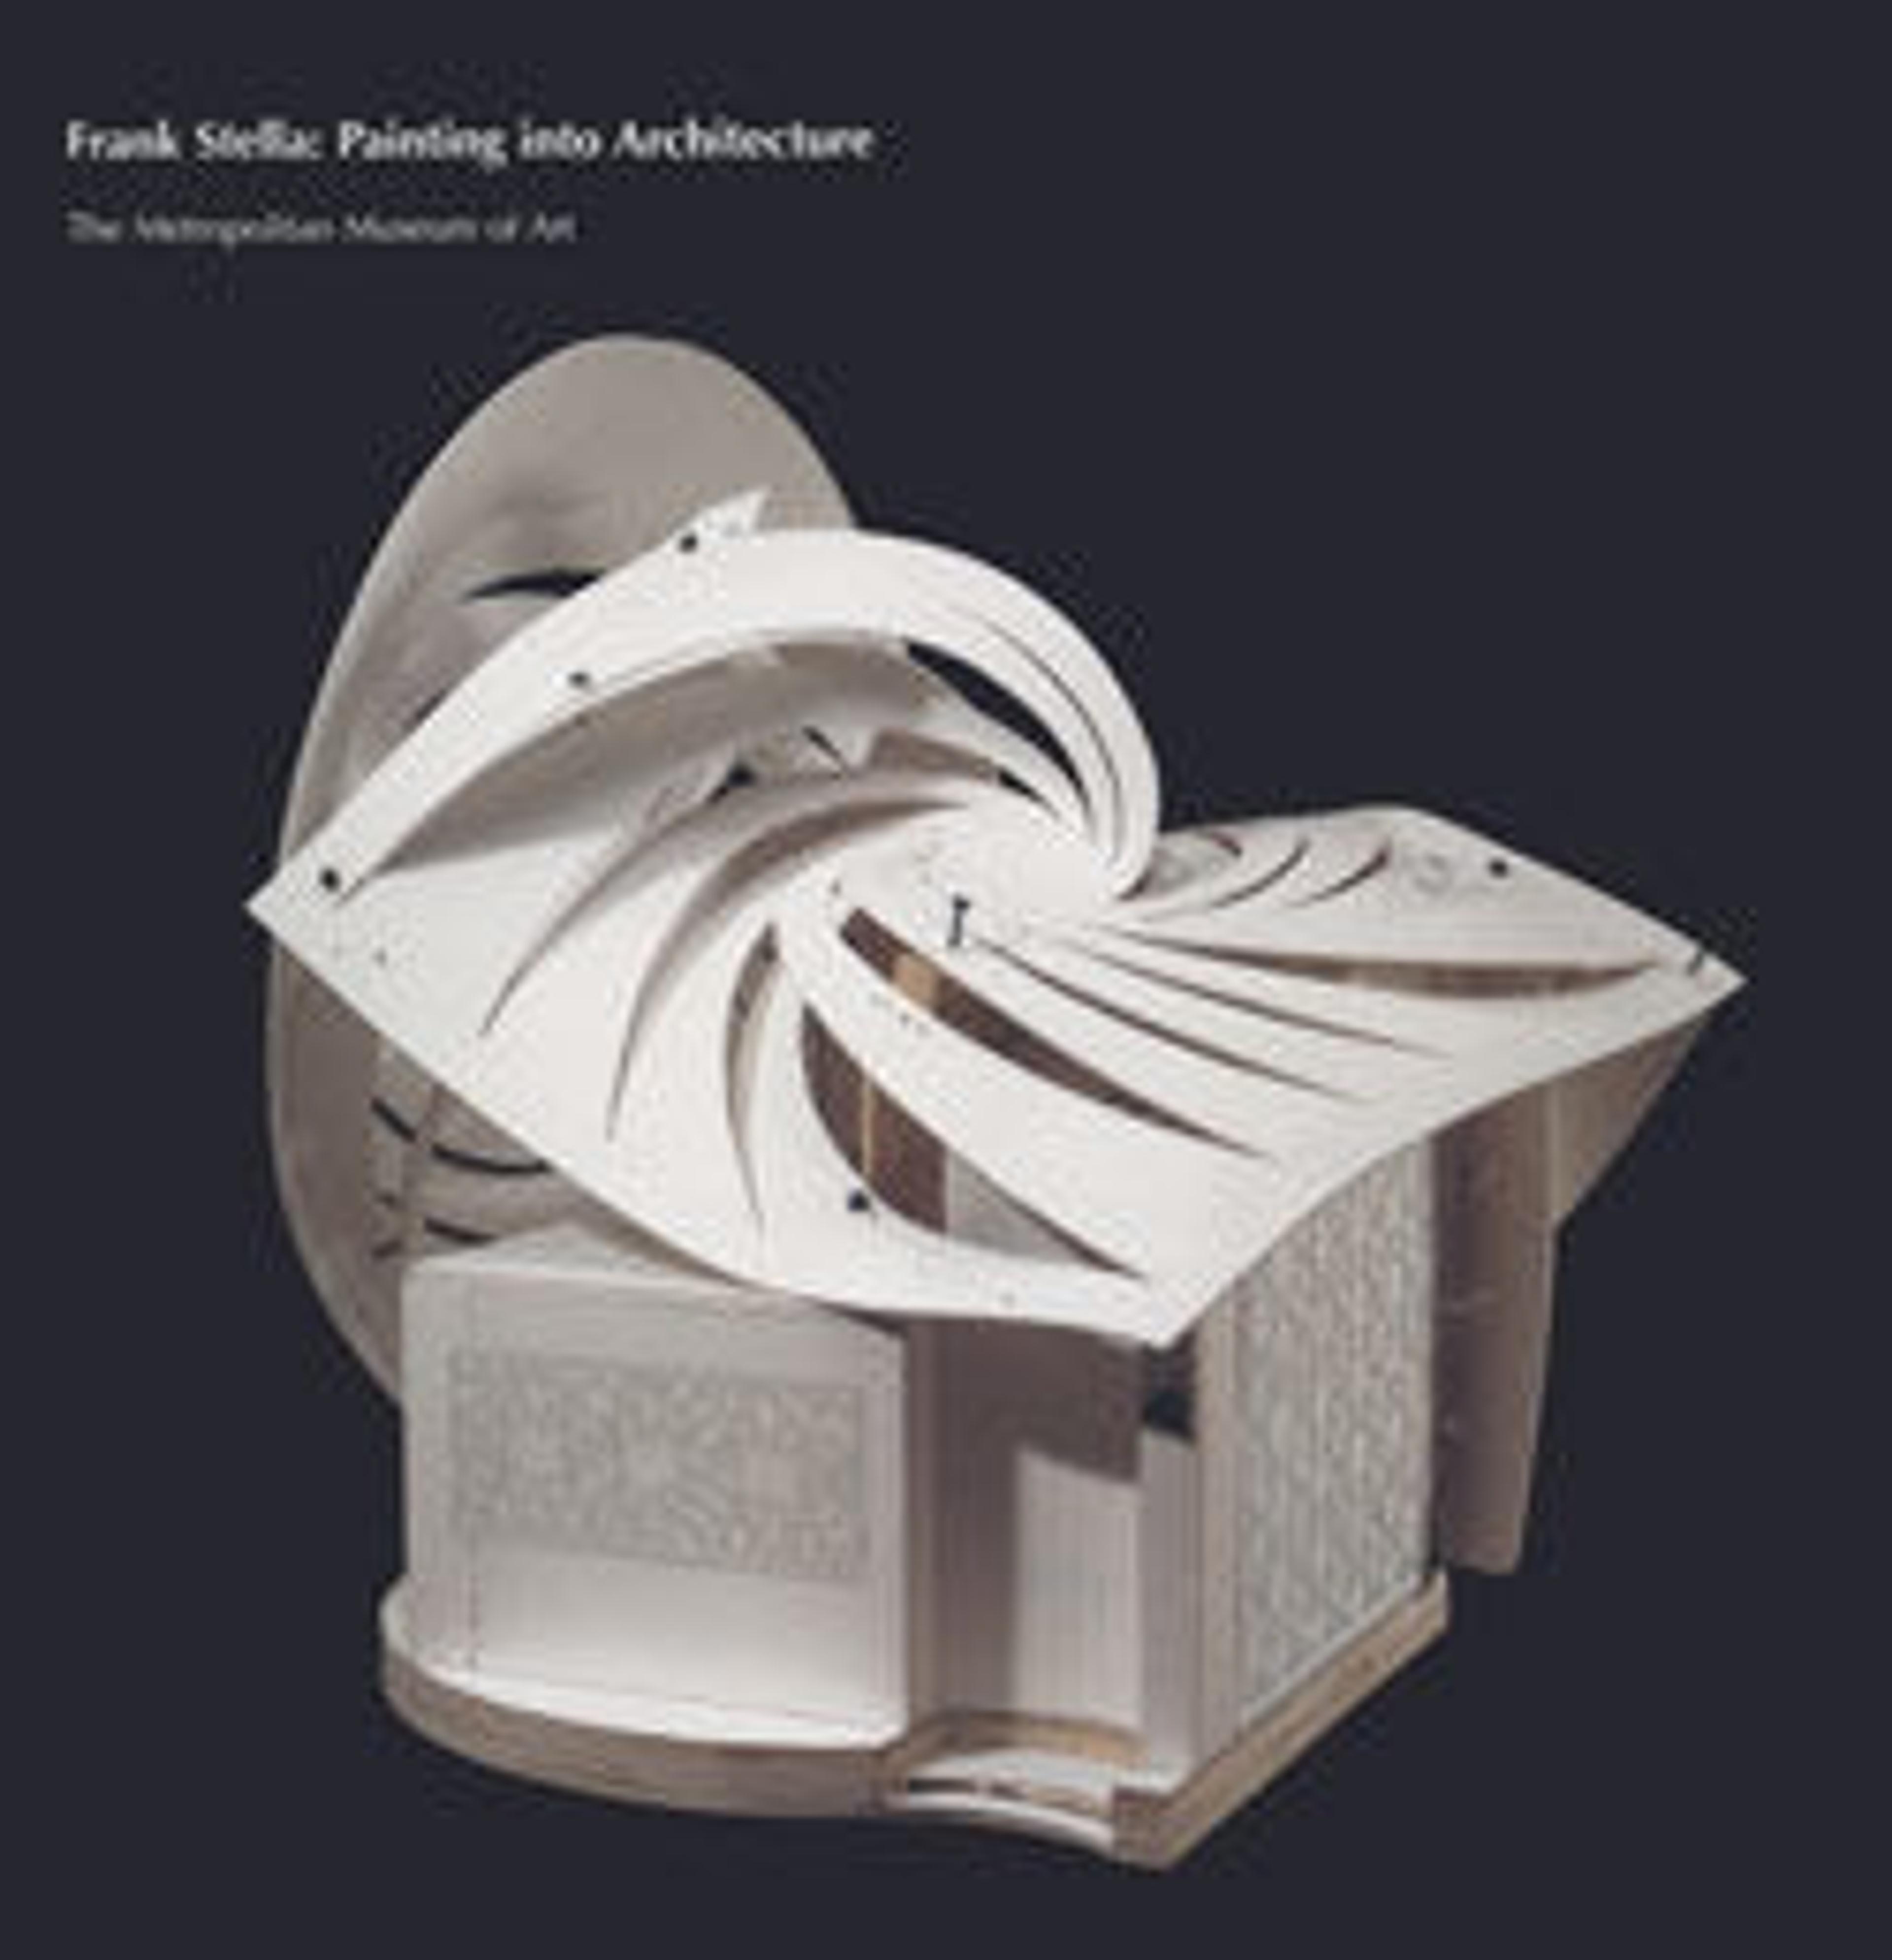 Frank Stella: Painting into Architecture